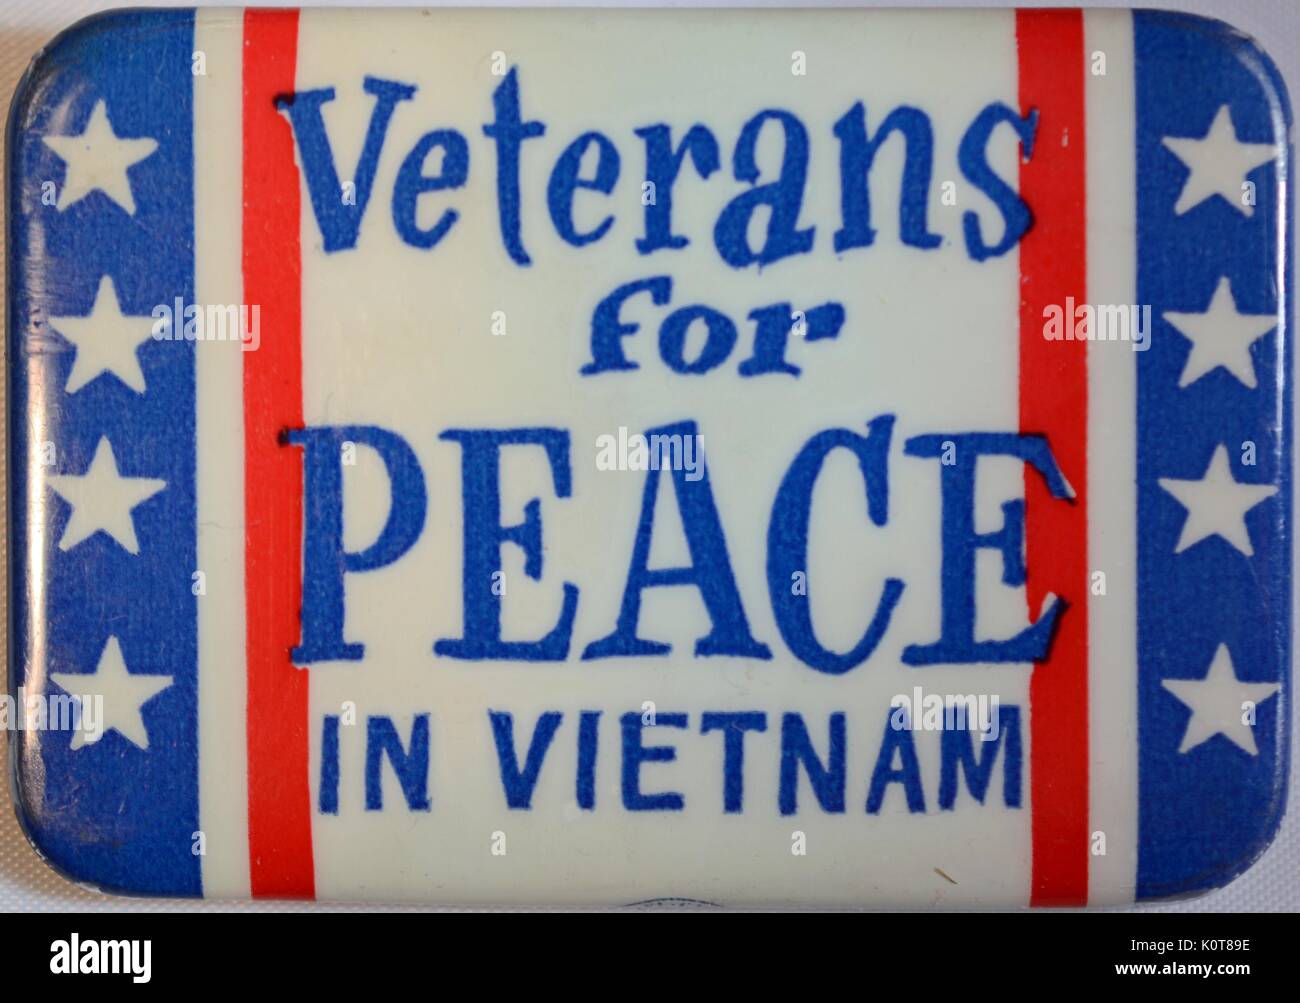 An anti-Vietnam War protest pin that contains the text 'Veterans for Peace in Vietnam', the background consists of the colors red, white and blue along with white stars, 1968. Stock Photo